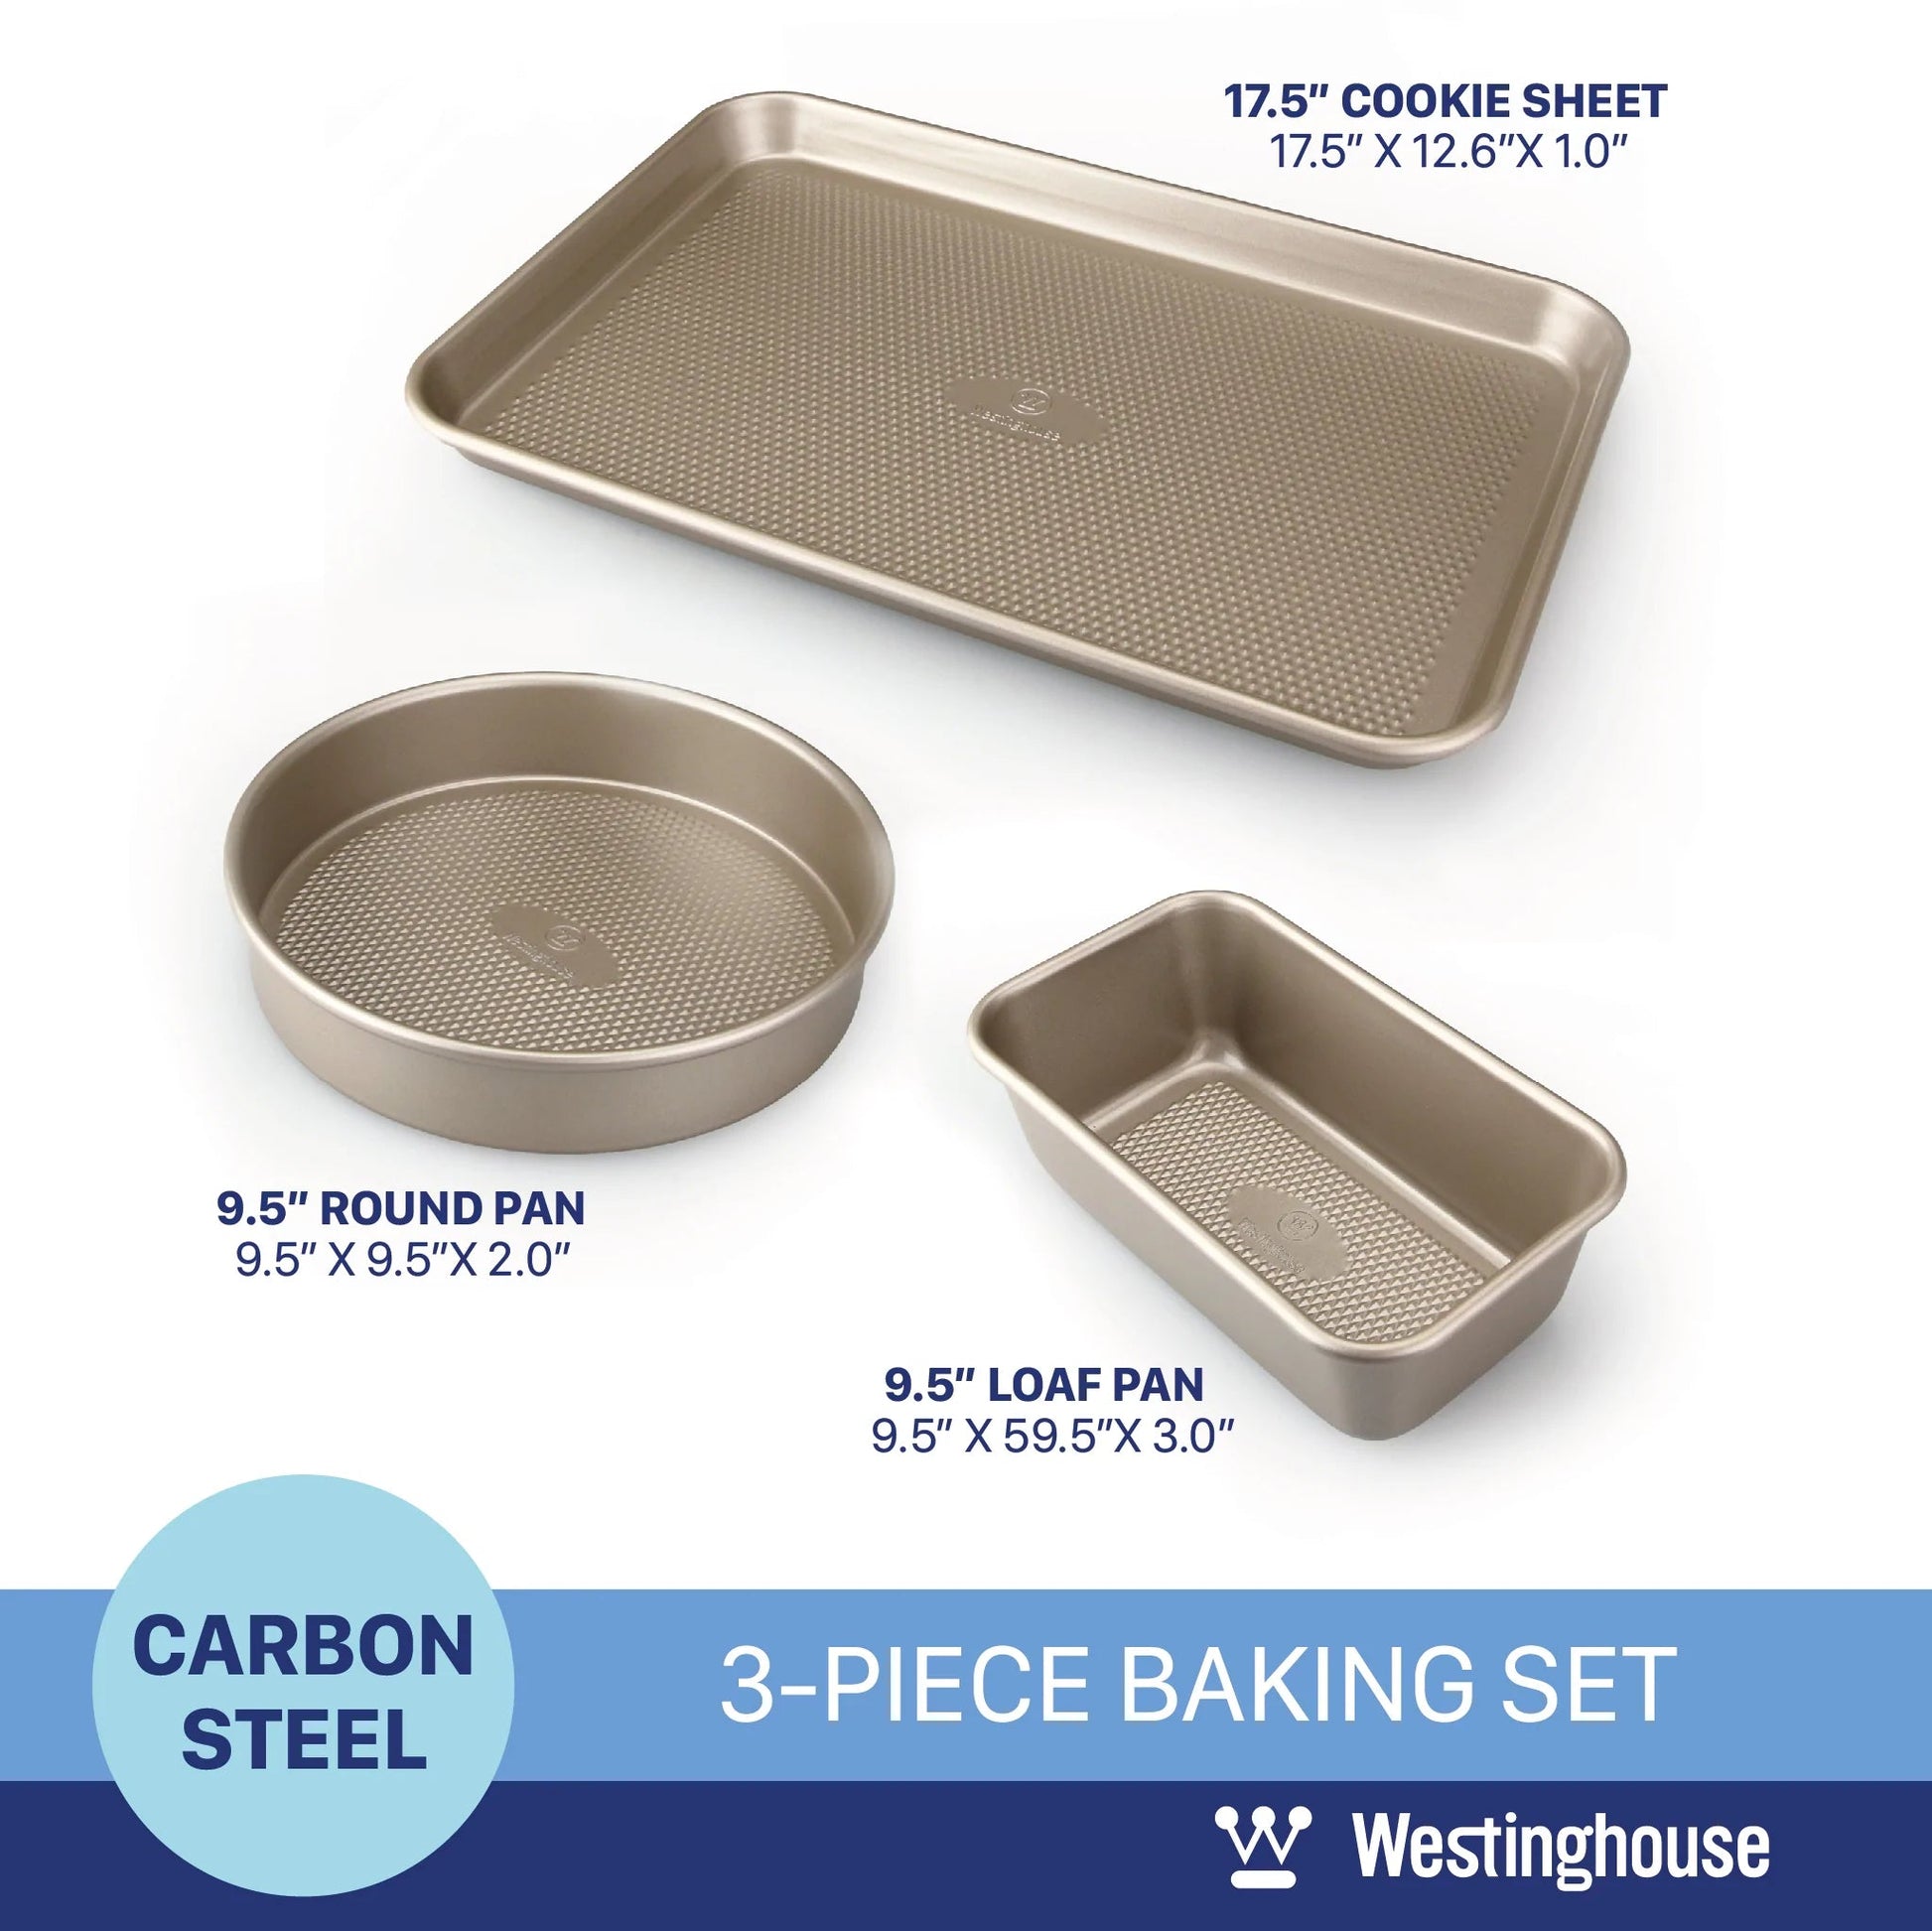 https://kitchenoasis.com/cdn/shop/files/Westinghouse-3-Piece-Carbon-Steel-Premium-Non-stick-Baking-Pan-Set-With-Loaf-Pan-Round-Pan-and-Cookie-Tray-2.webp?v=1685842122&width=1946